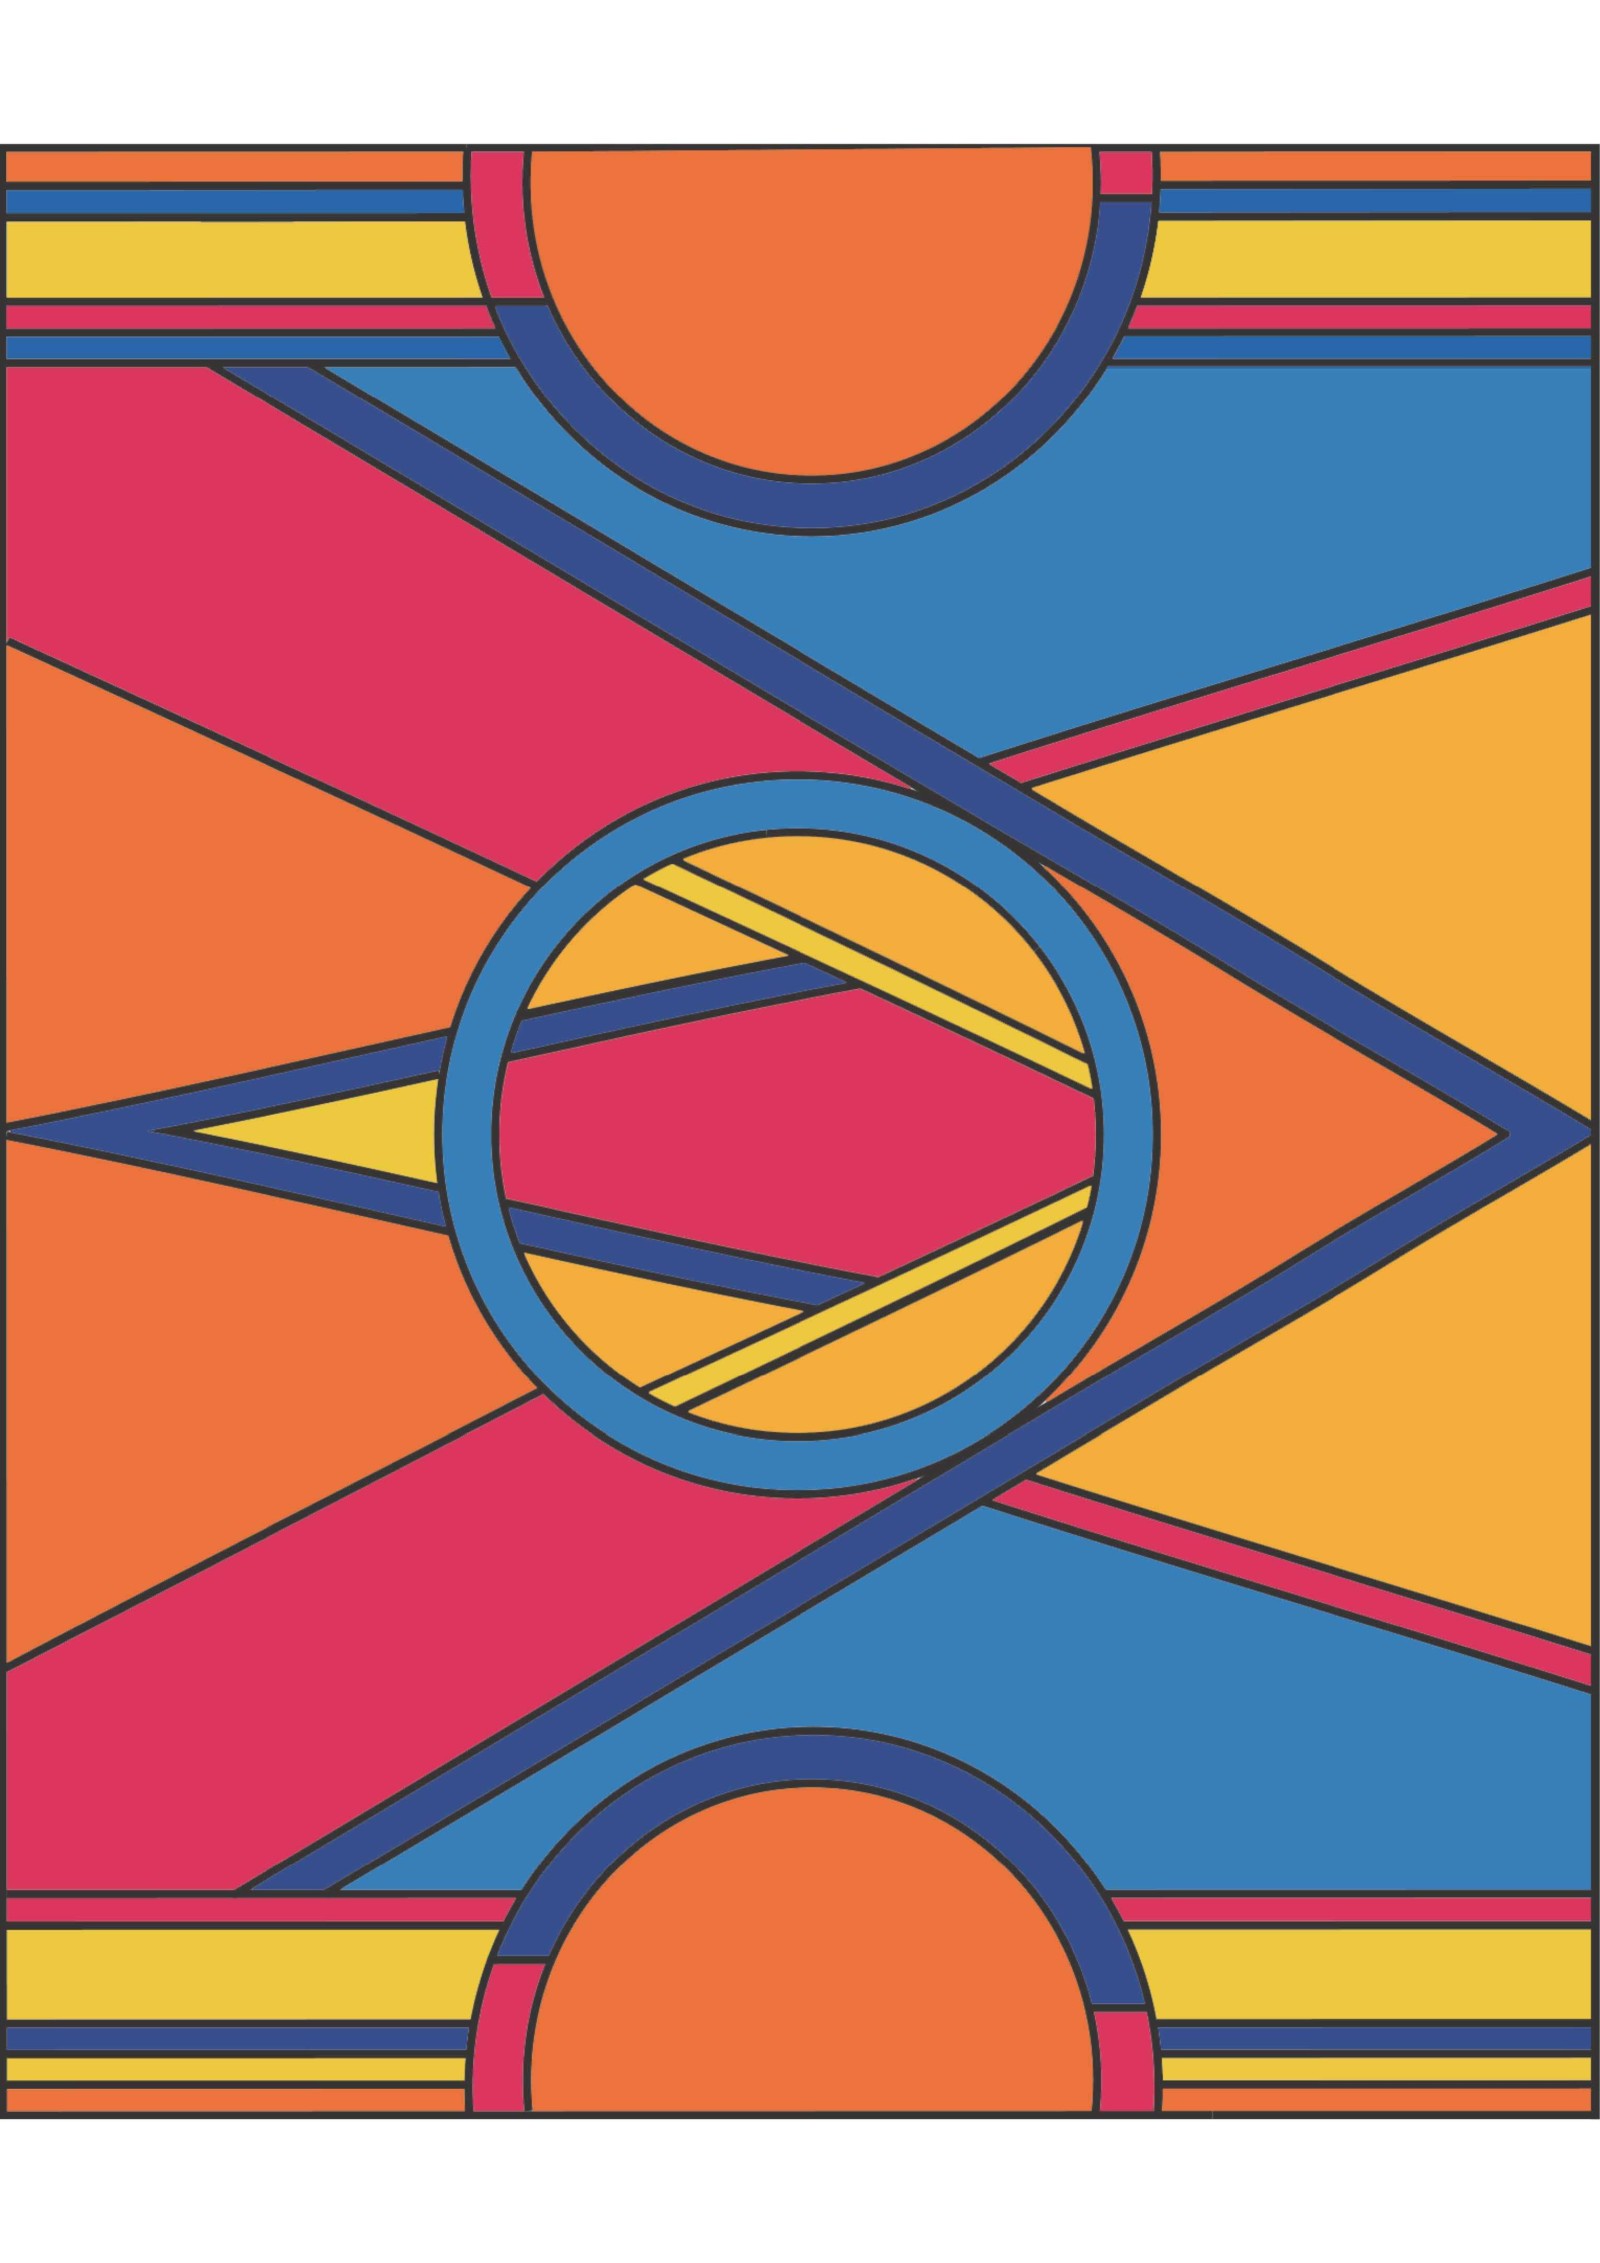 A bright, colourful pattern with straight lines, triangles and circles.